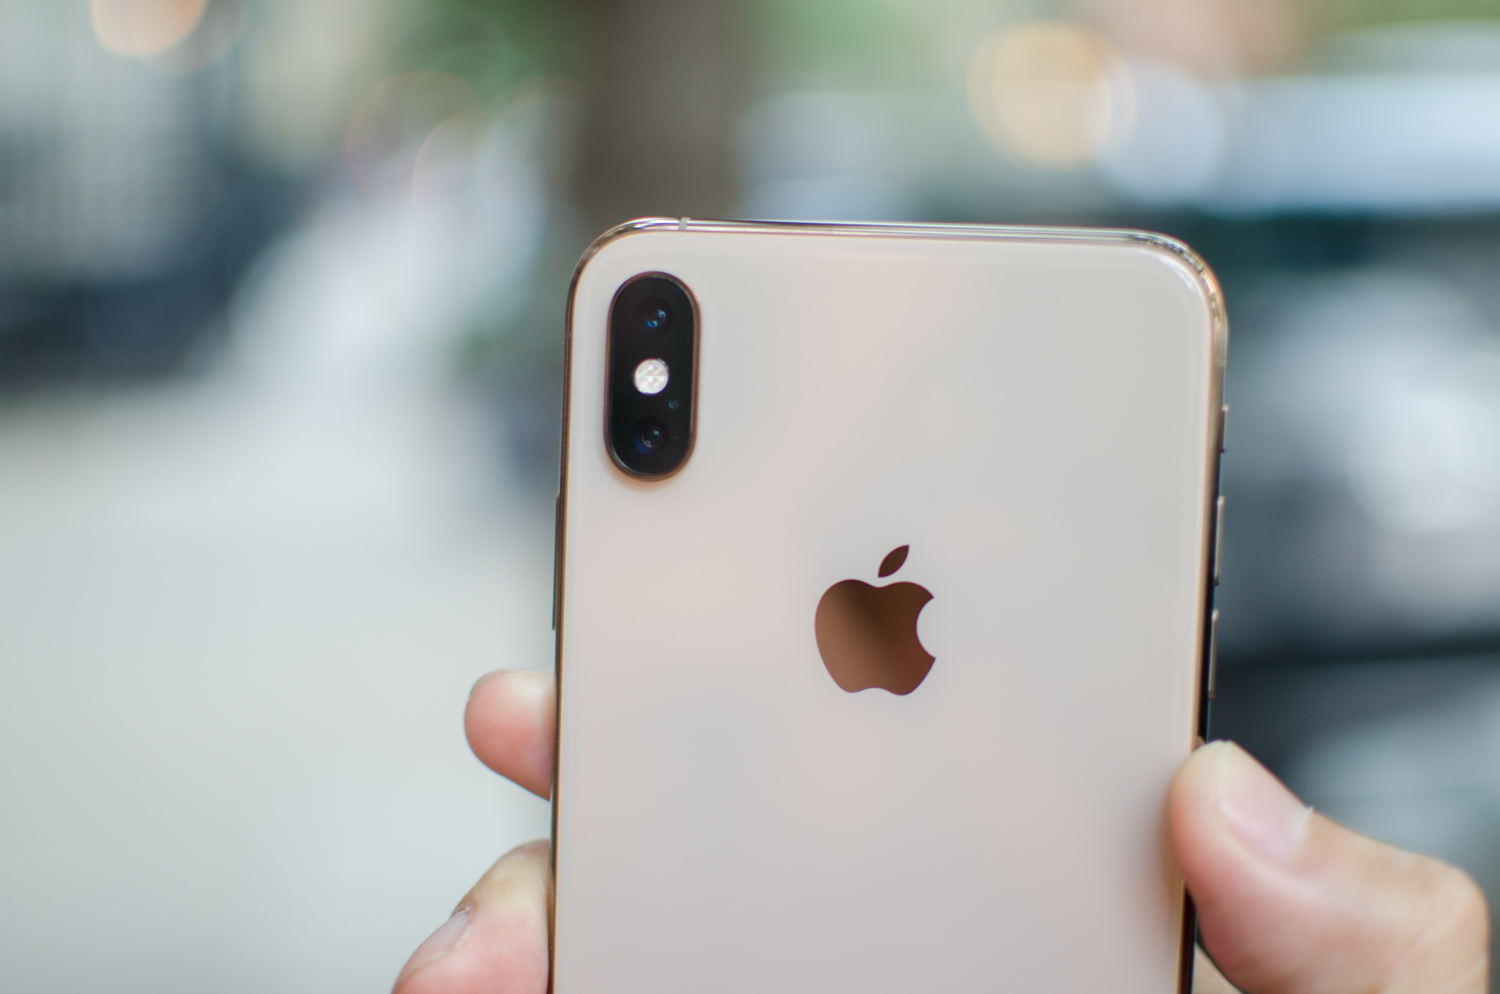 Apple iPhone XS Max review, specs, features, video review